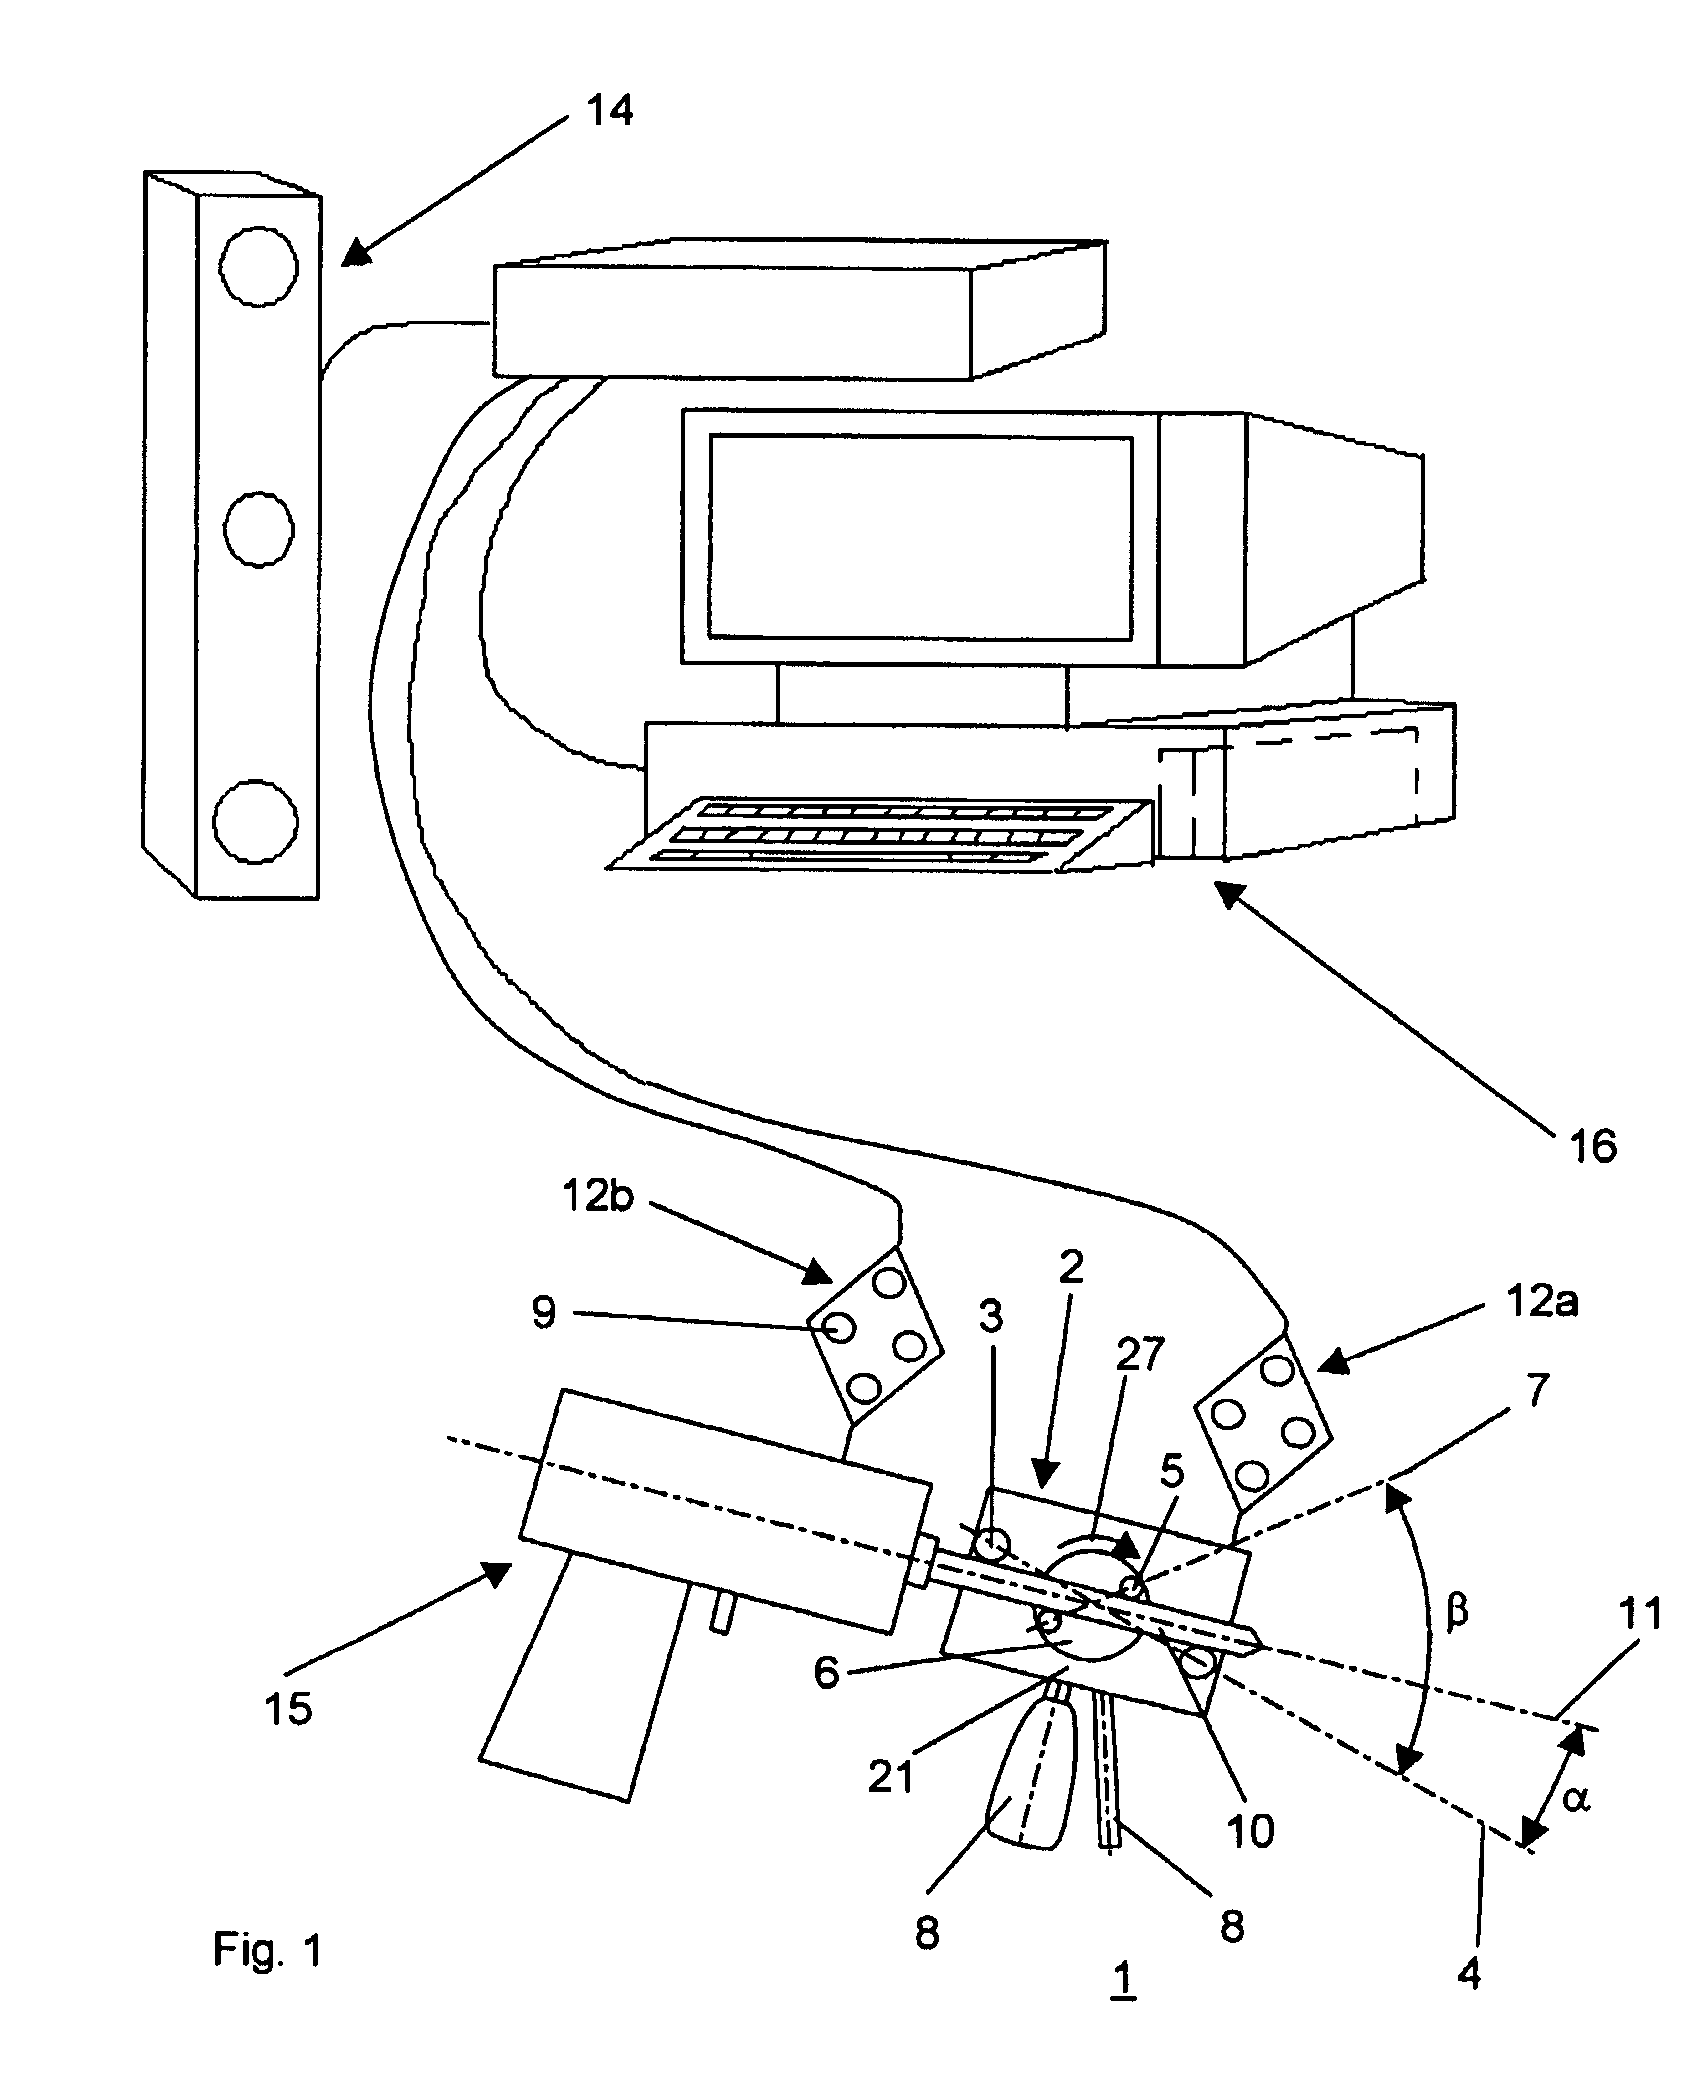 Device and process for calibrating geometrical measurements of surgical tools and orienting the same in space